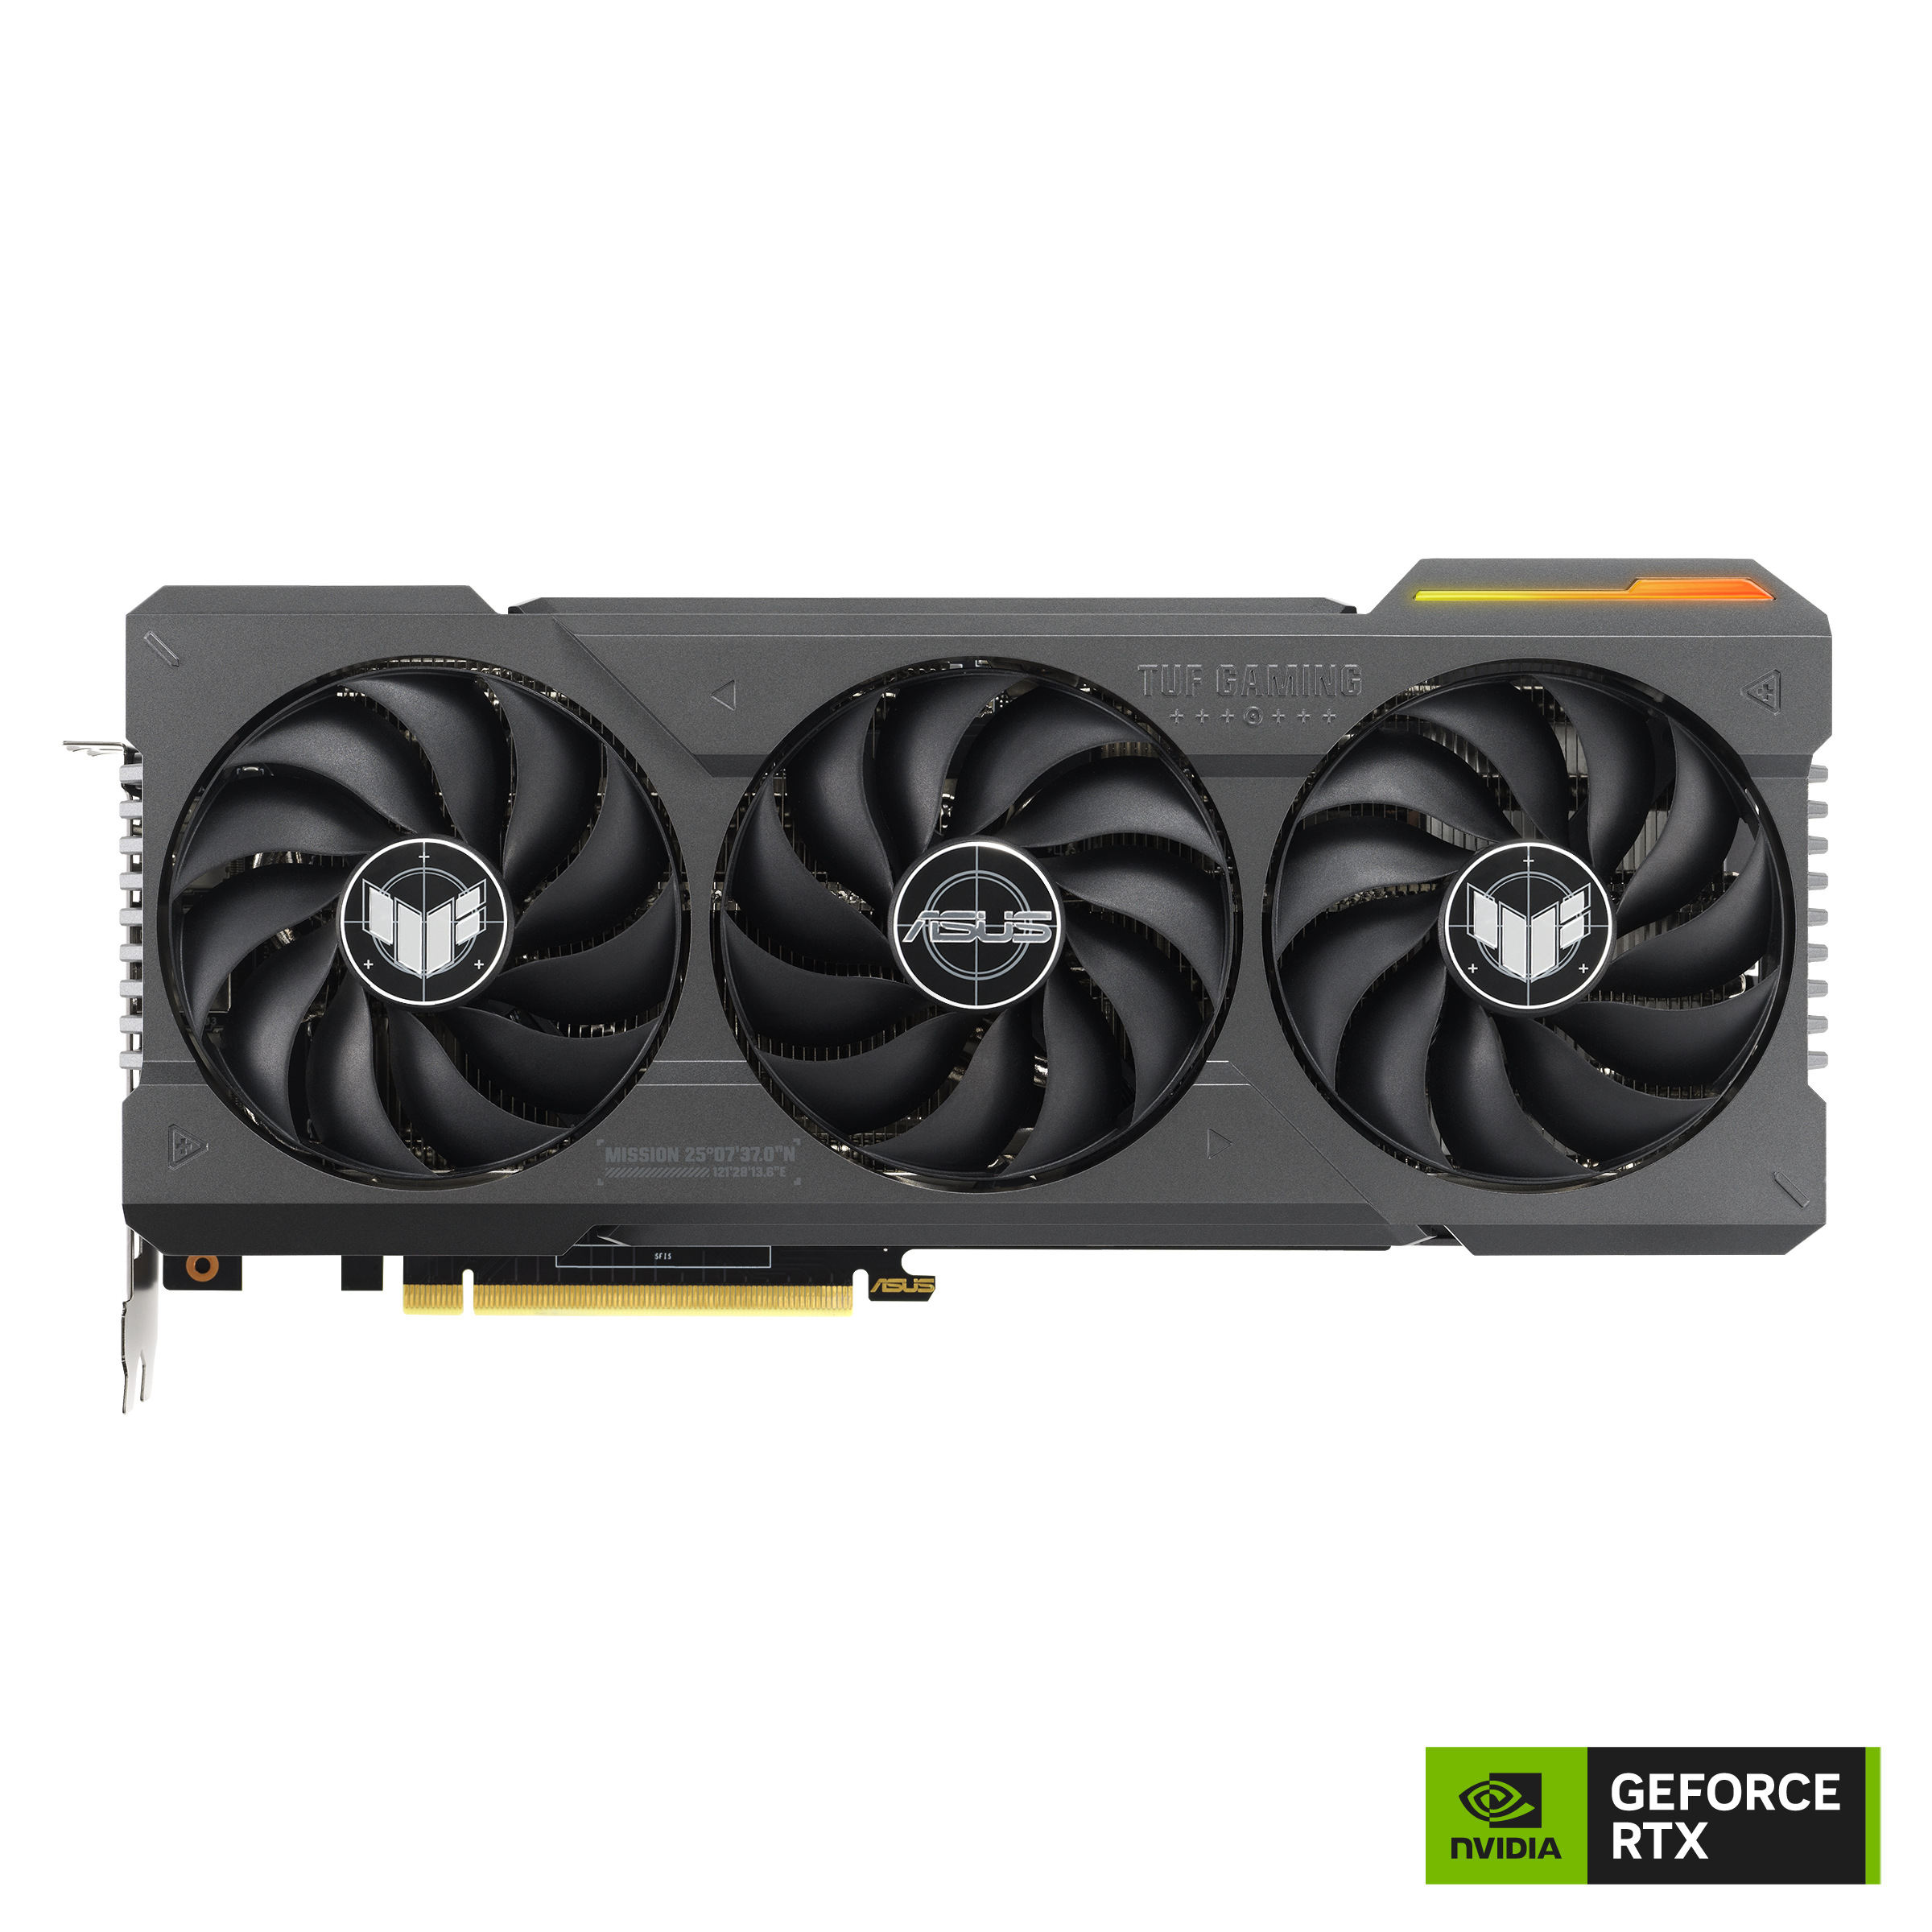 Do You Need A GPU (Graphics Card) If It's Not For Gaming?